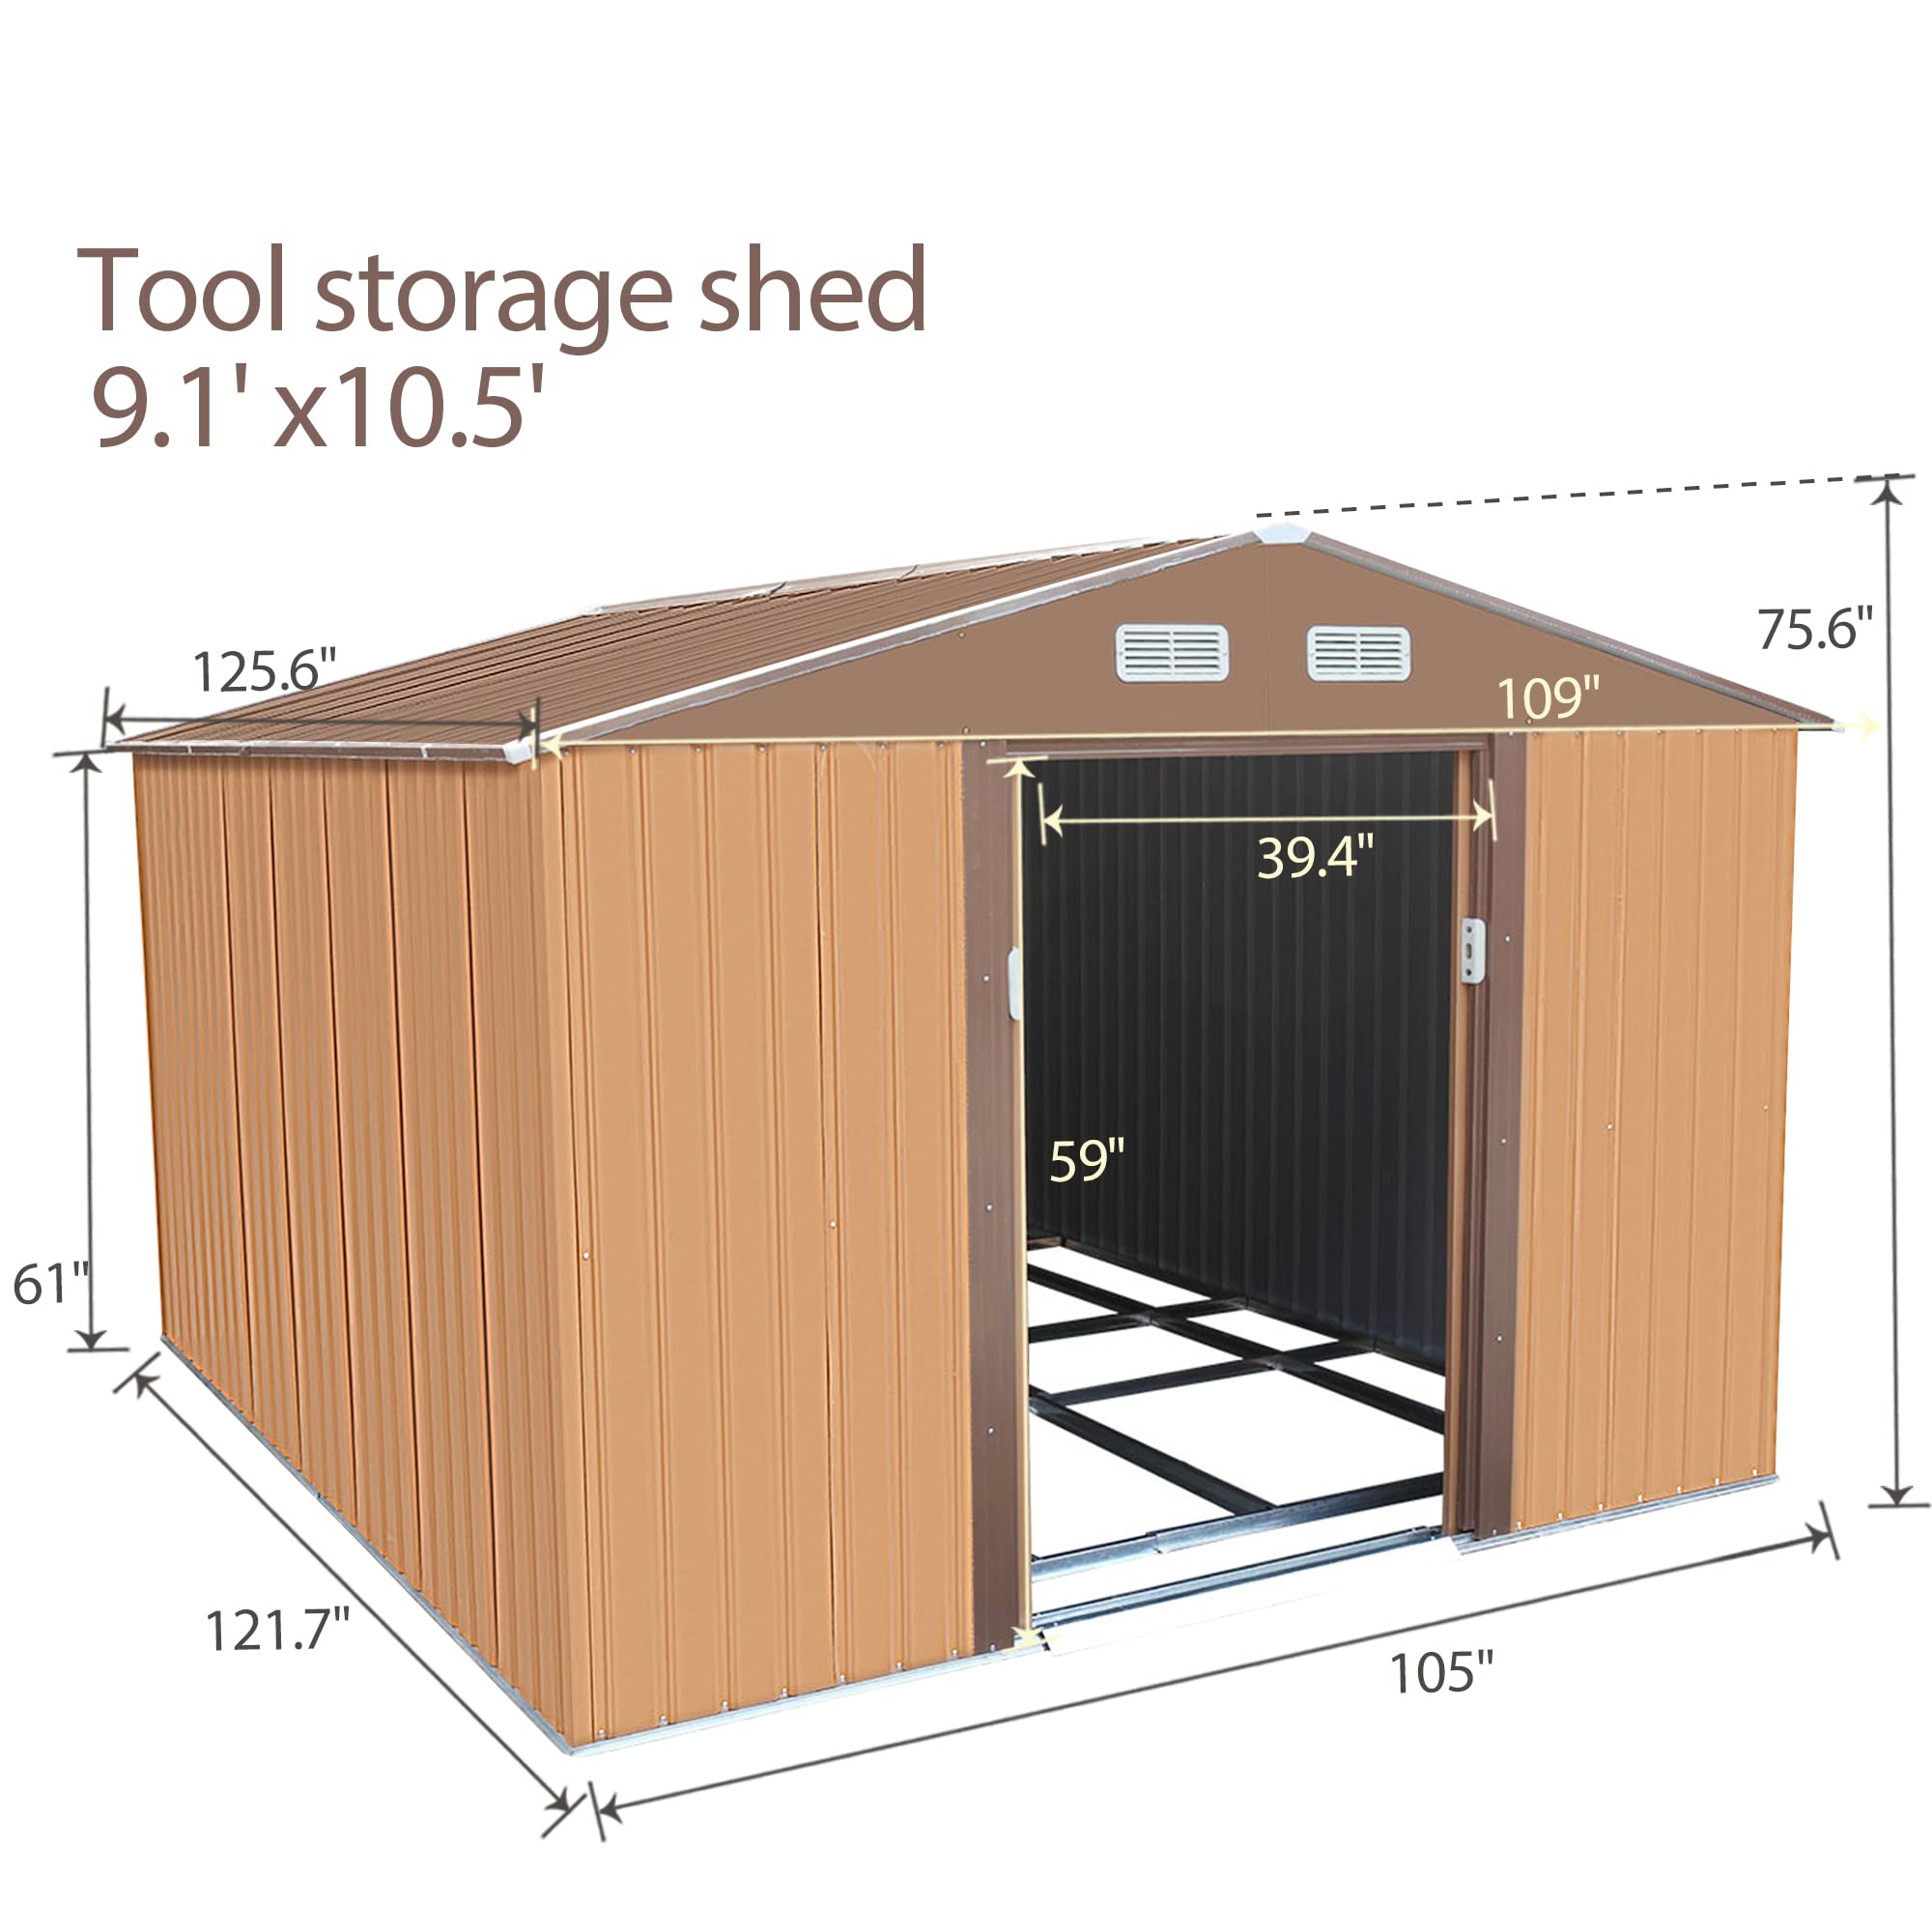 NBTiger 9.1’ x 10.5’ Large Outdoor Storage Shed, Sturdy Utility Tool Lawn Mower Equipment Organizer for Backyard Garden w/Gable Roof, Lockable Sliding Door, Vents, Floor Frame - Coffee